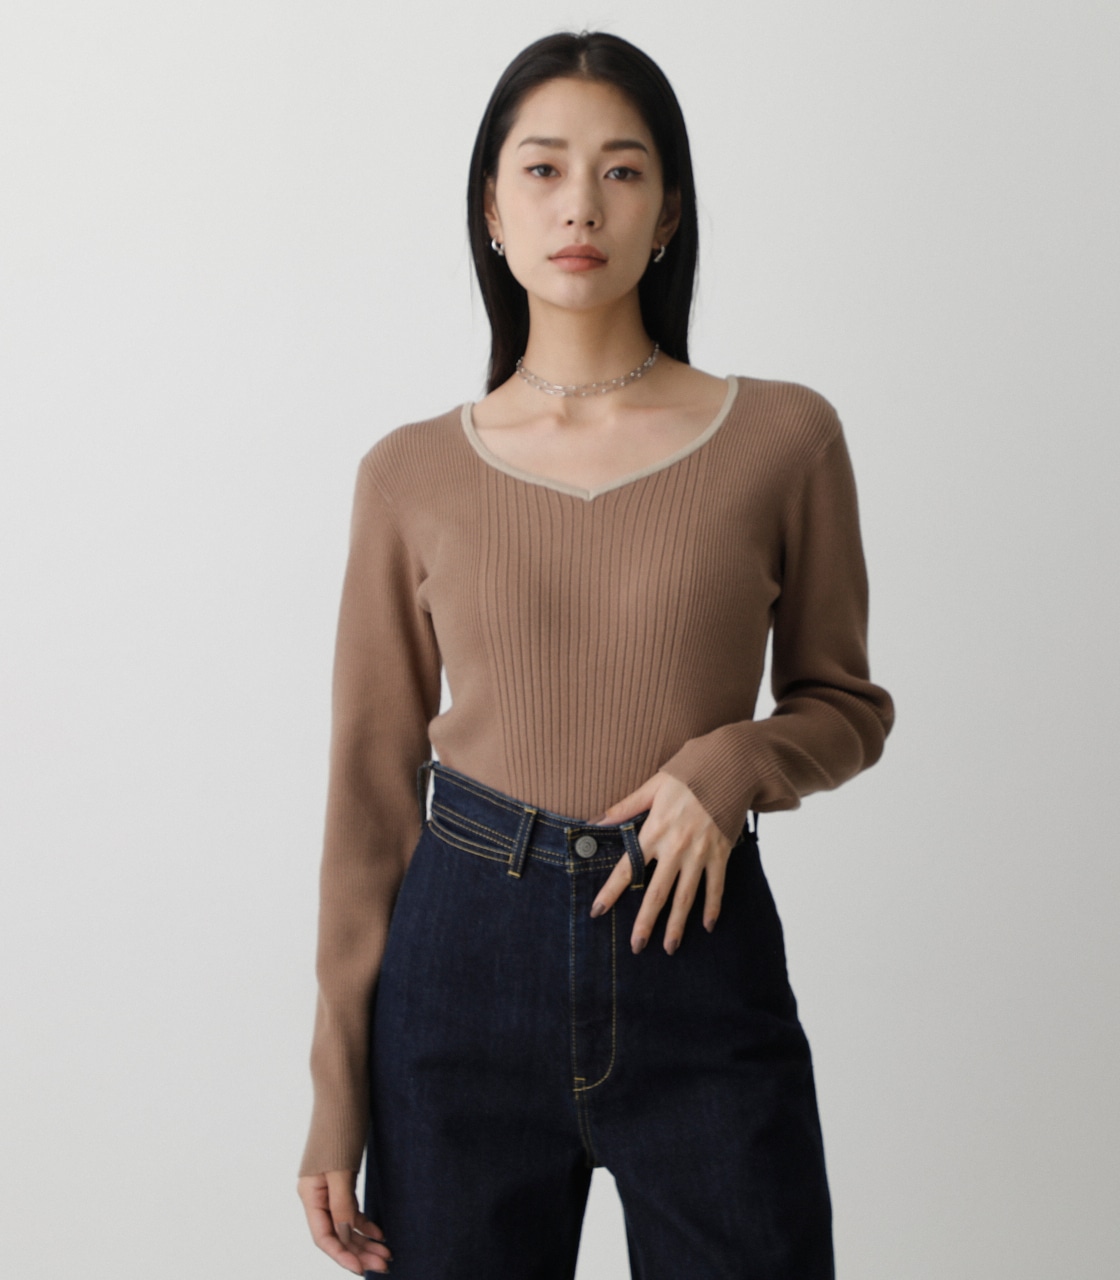 BACK LACE-UP KNIT TOPS/バックレースアップニットトップス 詳細画像 L/BRN 1